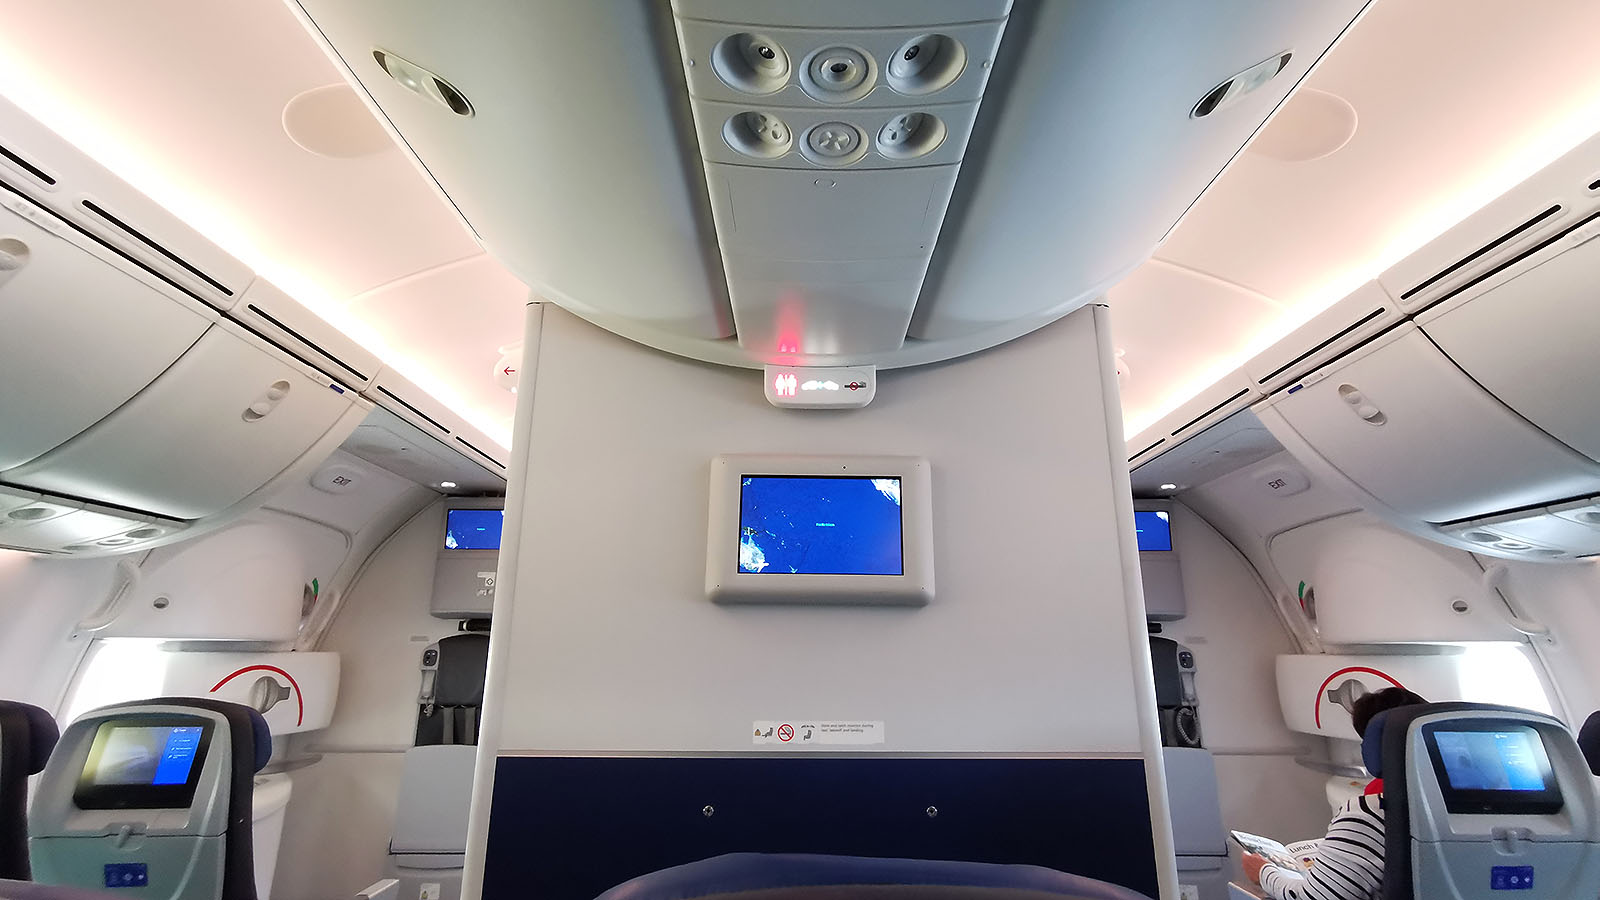 Cabin lighting in United Airlines Boeing 787 Economy